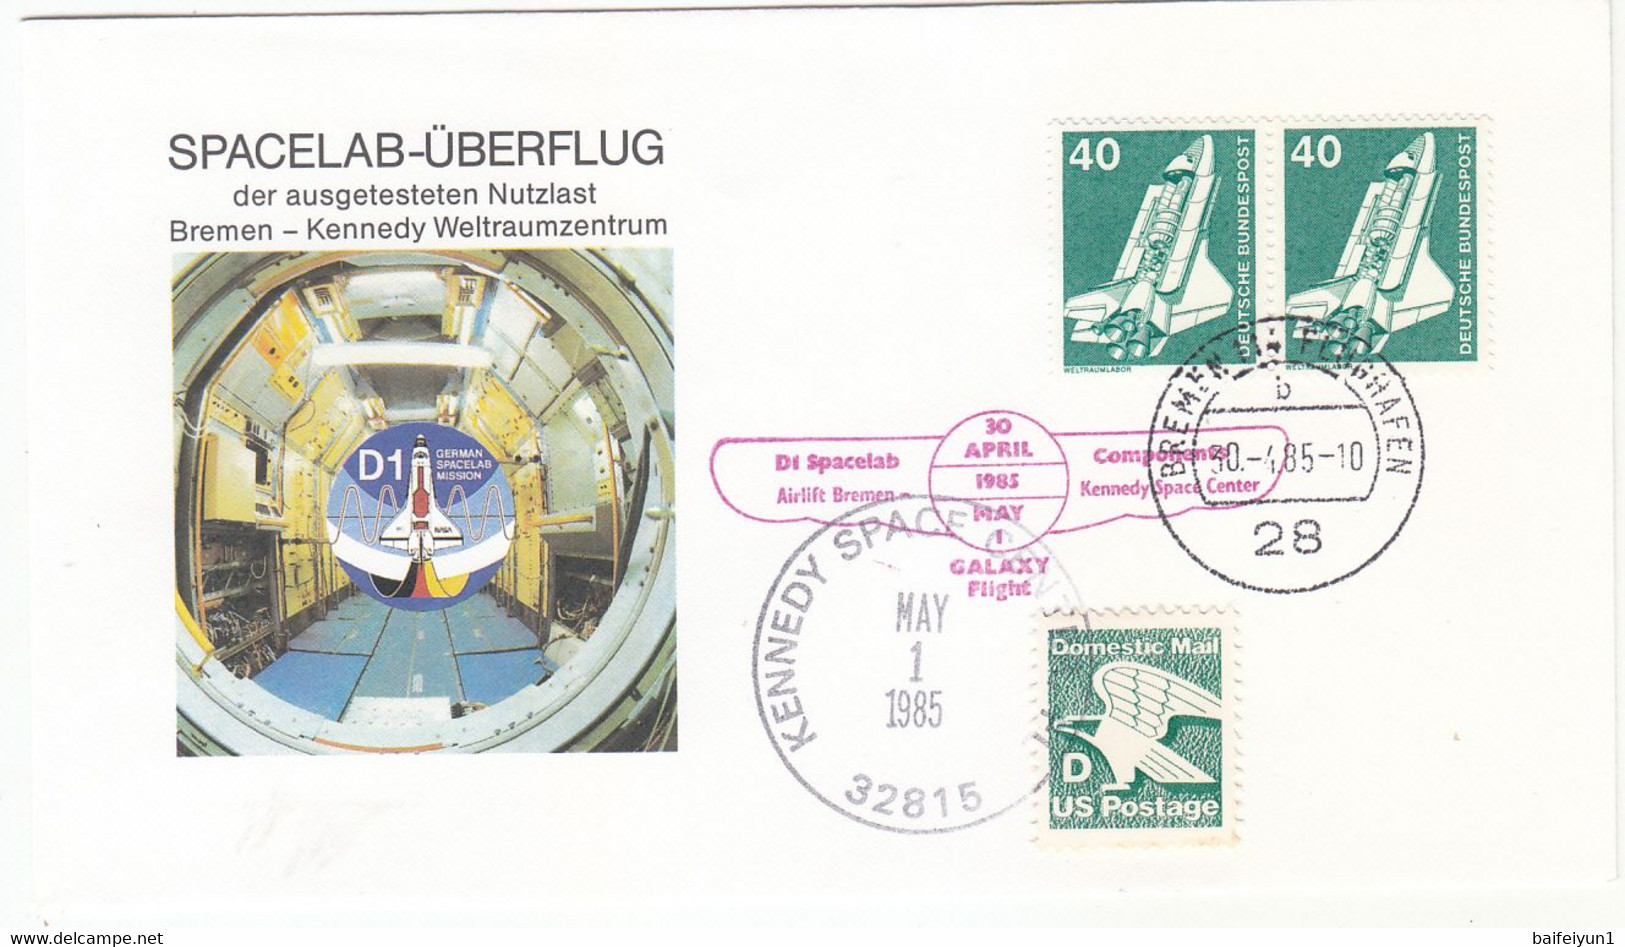 1985 USA  Space Shuttle Challenger STS-51B  Mission And Spacelab  Commemorative Cover - Noord-Amerika